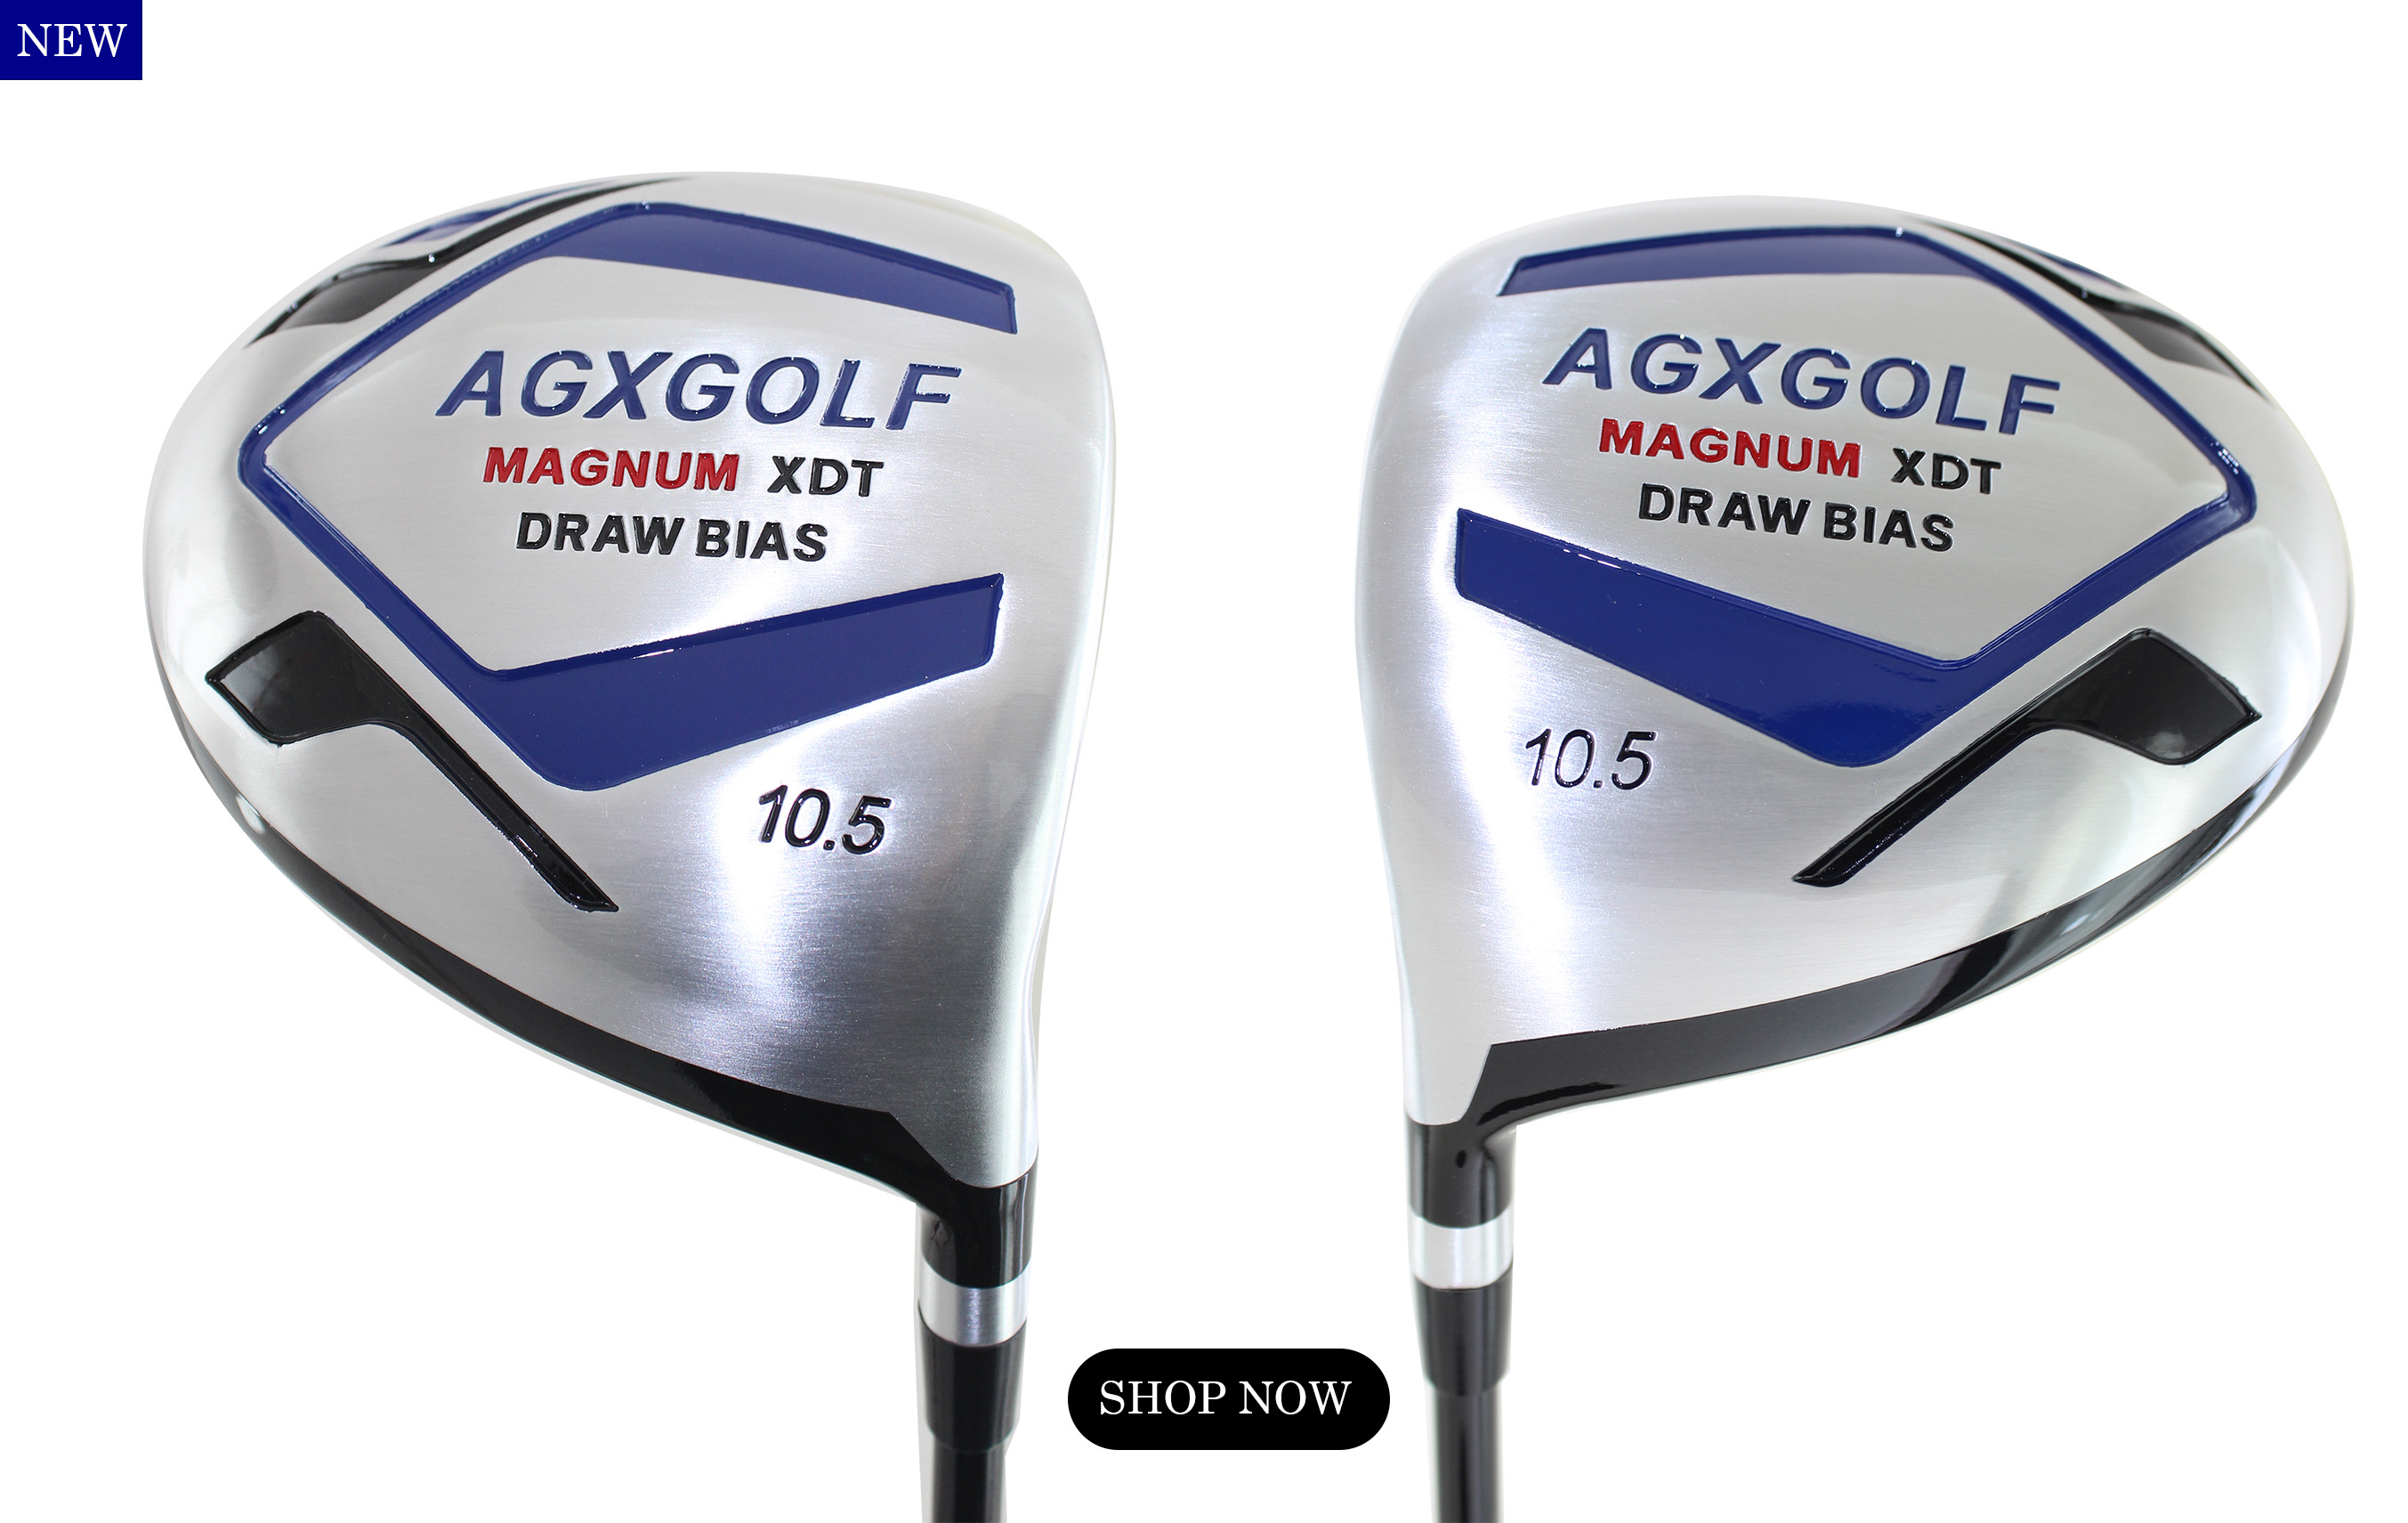 AGXGOLF.COM, Golf's Best Value: Golf Clubs for all sizes Built in the USA. Men's Ladies, Seniors, Boy's, Girls & Juniors. Left and Right Hand. We stock set, drivers, fairay any utility